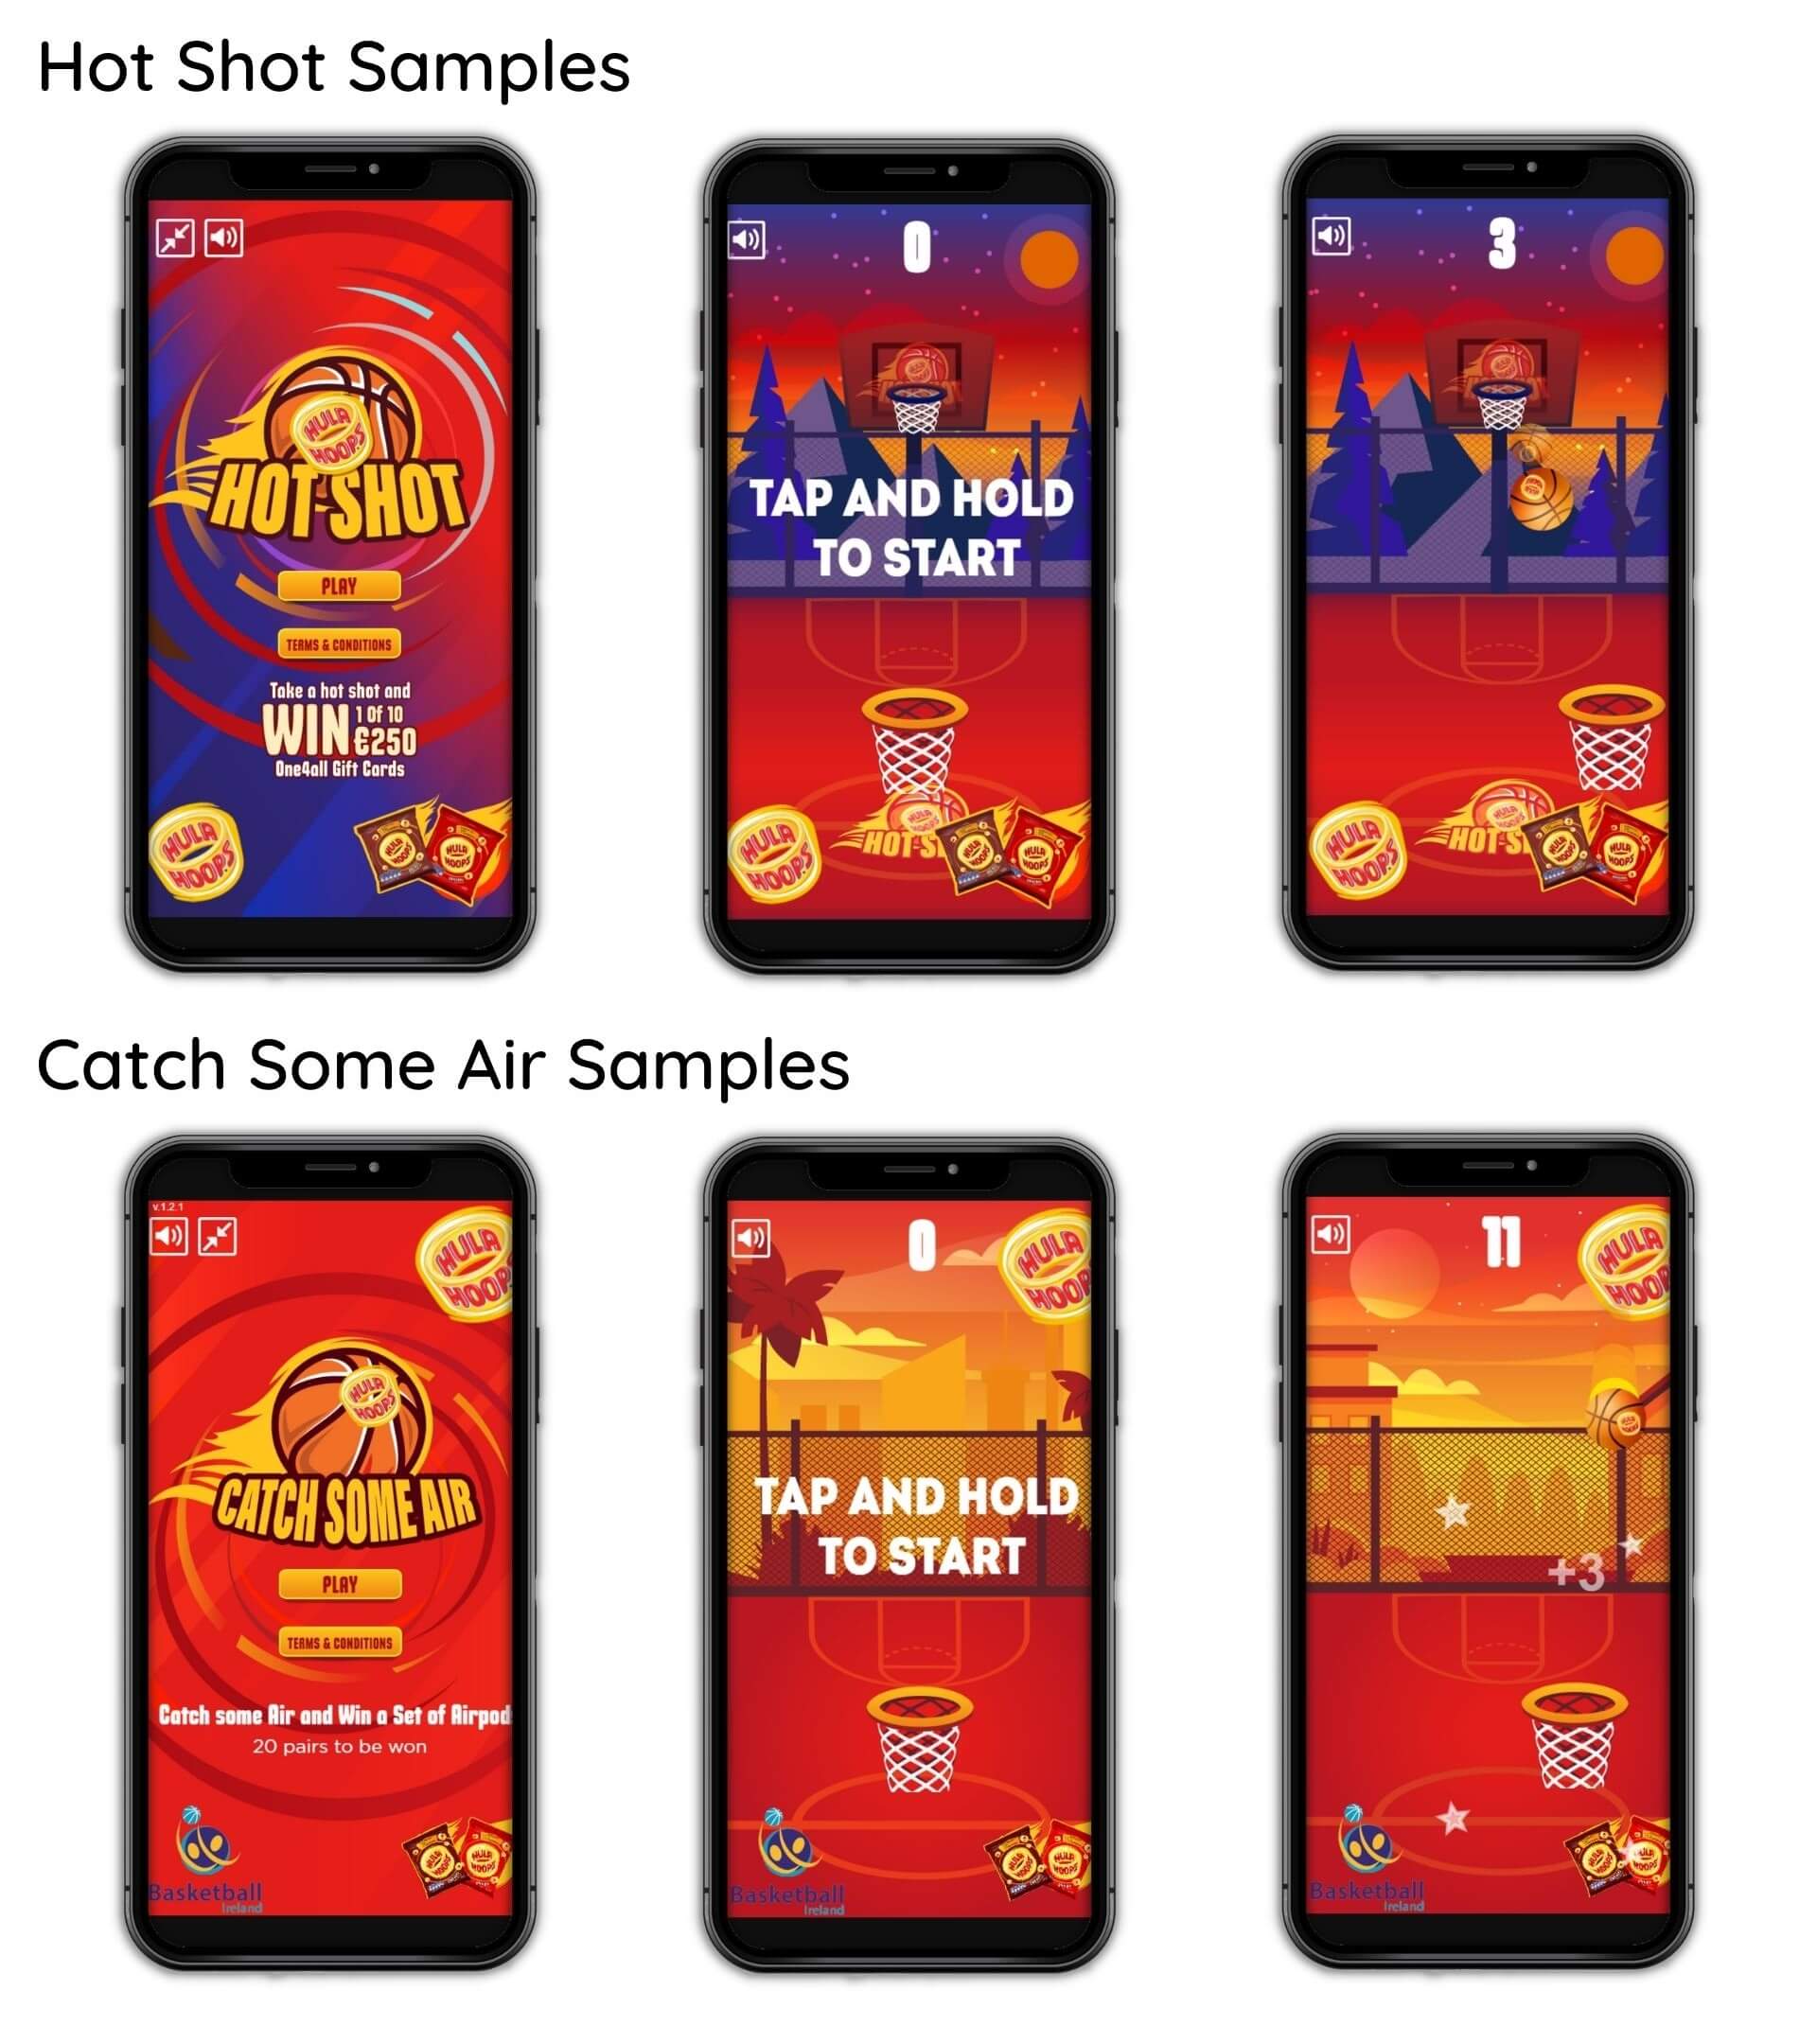 HTML5 Basketball Games To Promote A Snack Brand